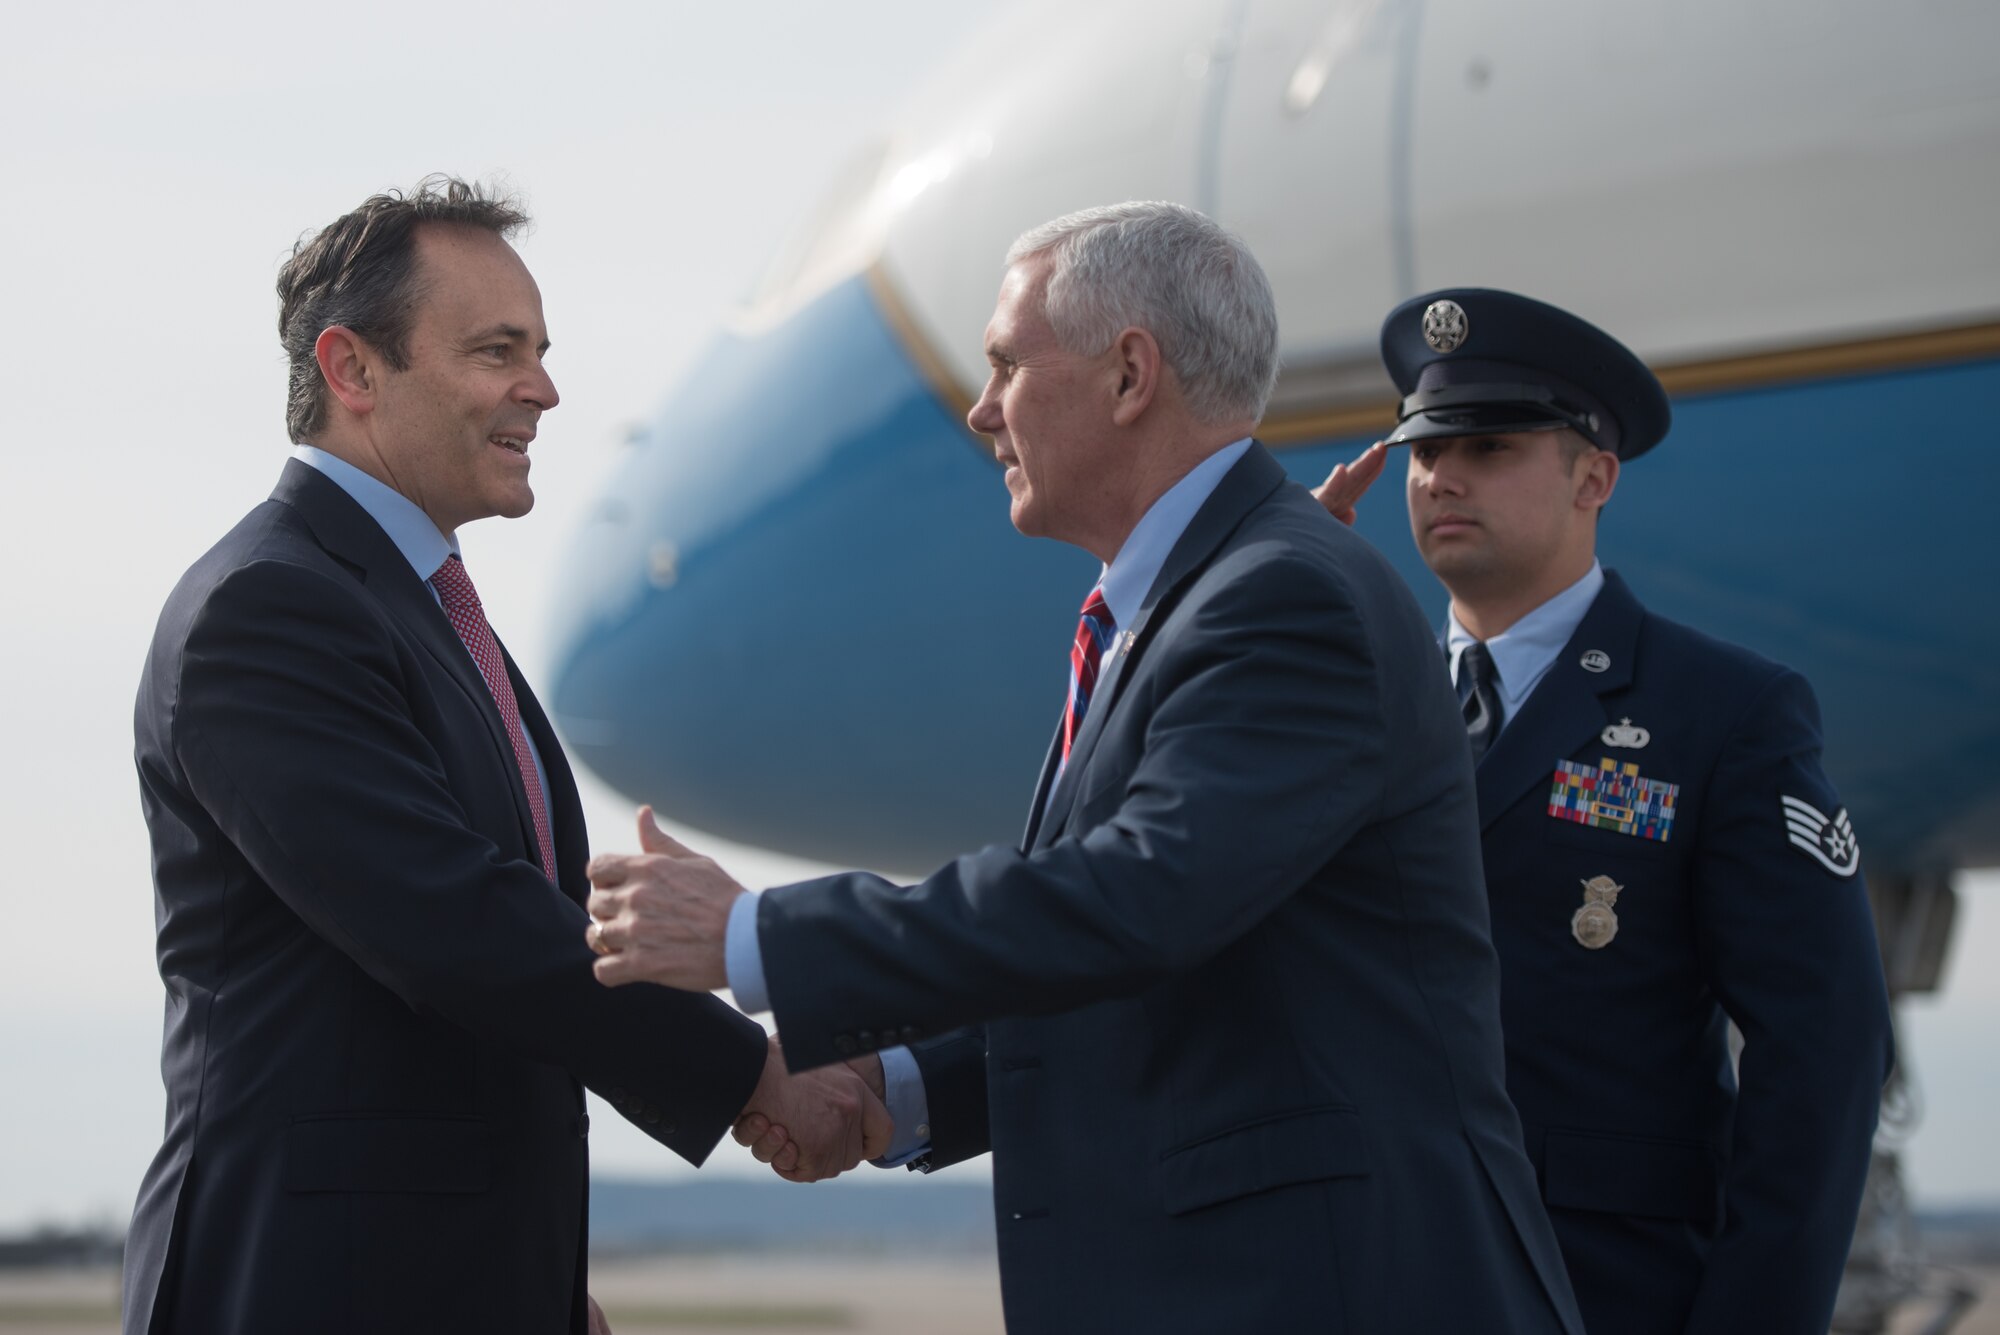 Kentucky Gov. Matt Bevin (left) greets Vice President Mike Pence (center) at the Kentucky Air National Guard Base in Louisville, Ky., March 11, 2017. Pence was in Louisville to speak with local business leaders about health care and the economy. (U.S. Air National Guard photo by Staff Sgt. Joshua Horton)